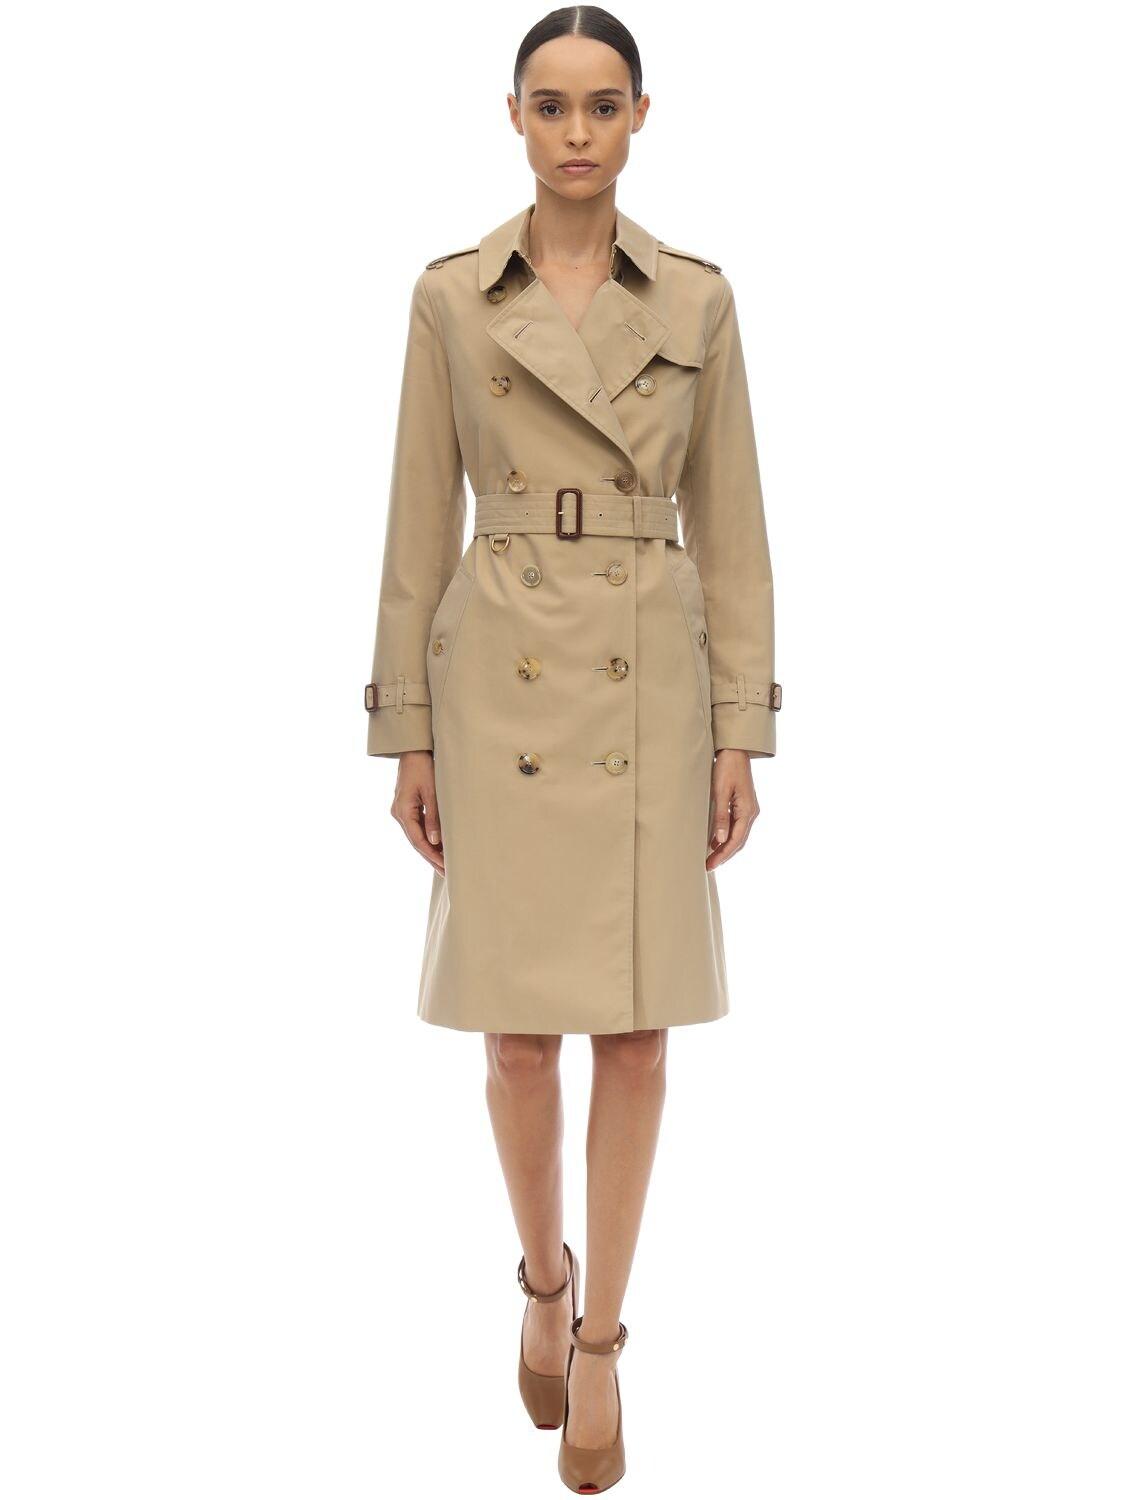 Burberry Kensington Long Canvas Trench Coat in Beige (Natural) - Lyst